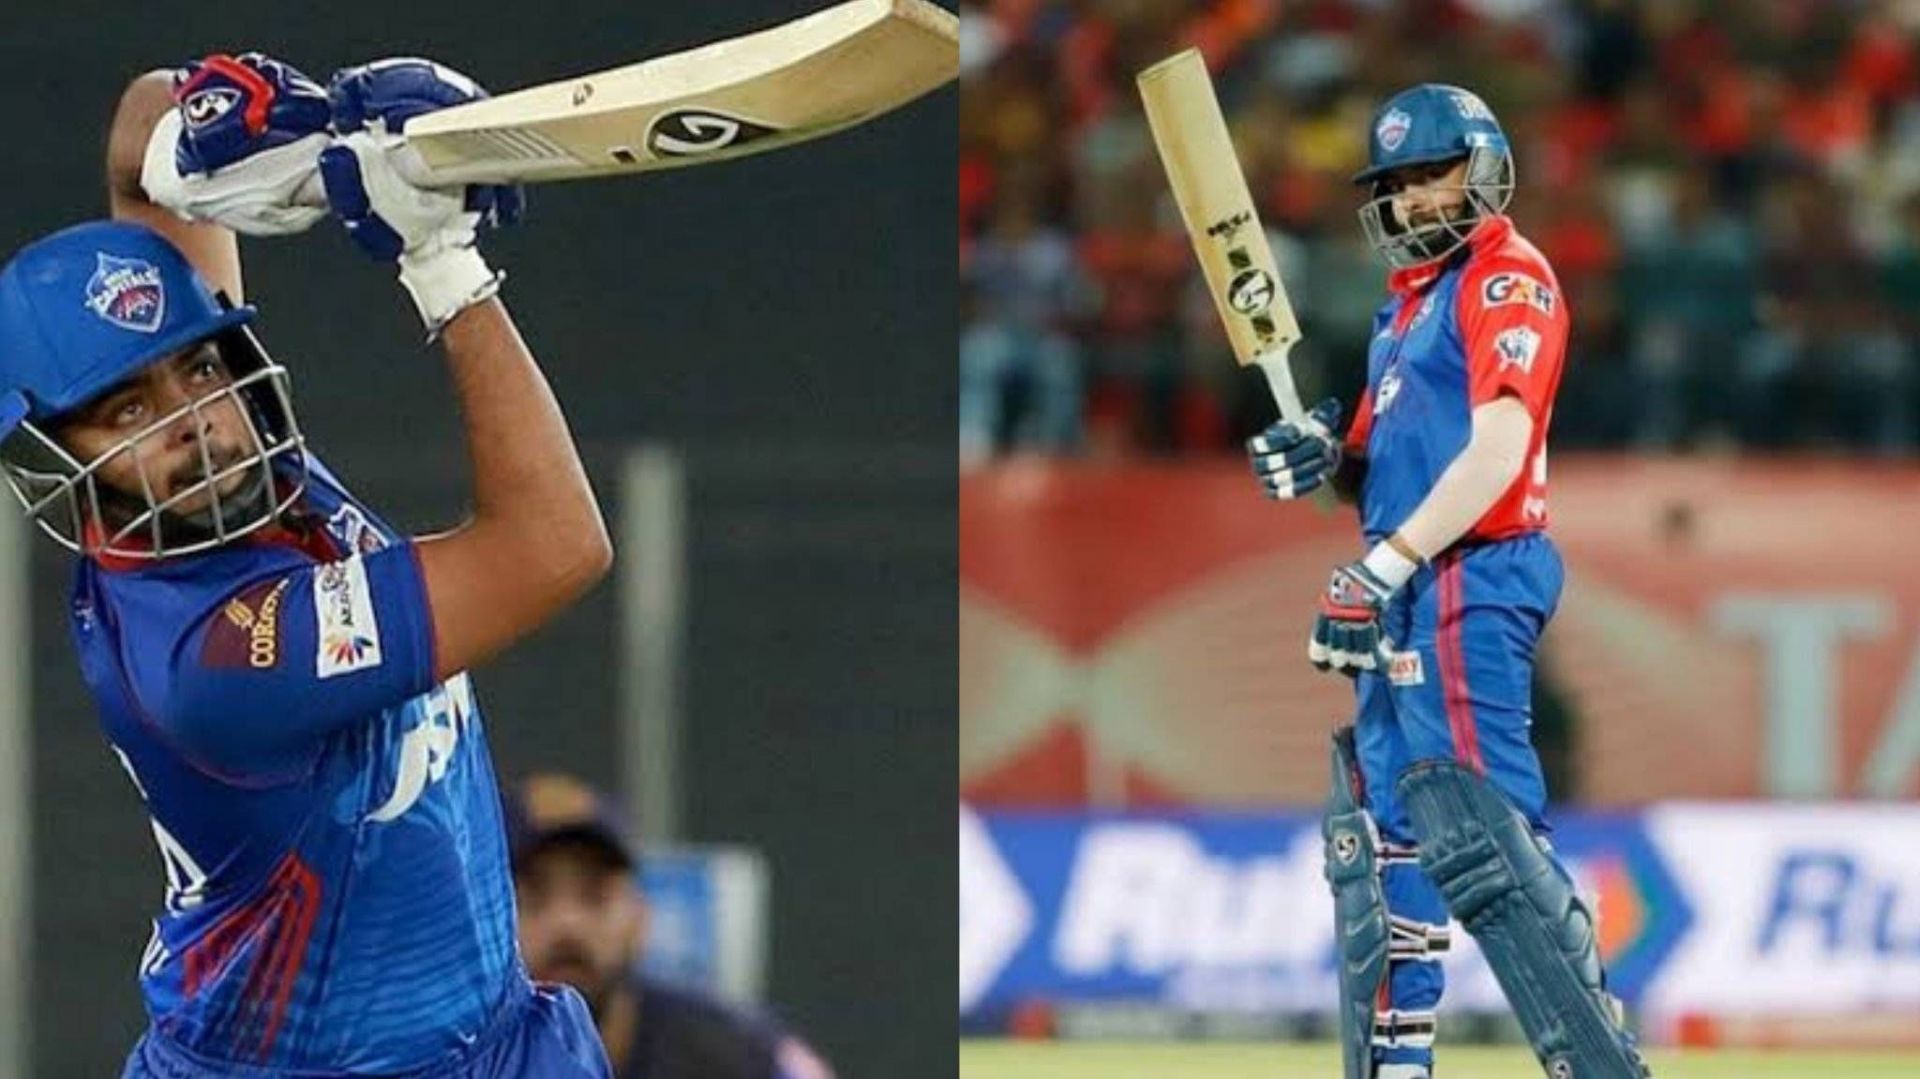 Prithvi Shaw has played some fine knocks against CSK (Image: IPL)